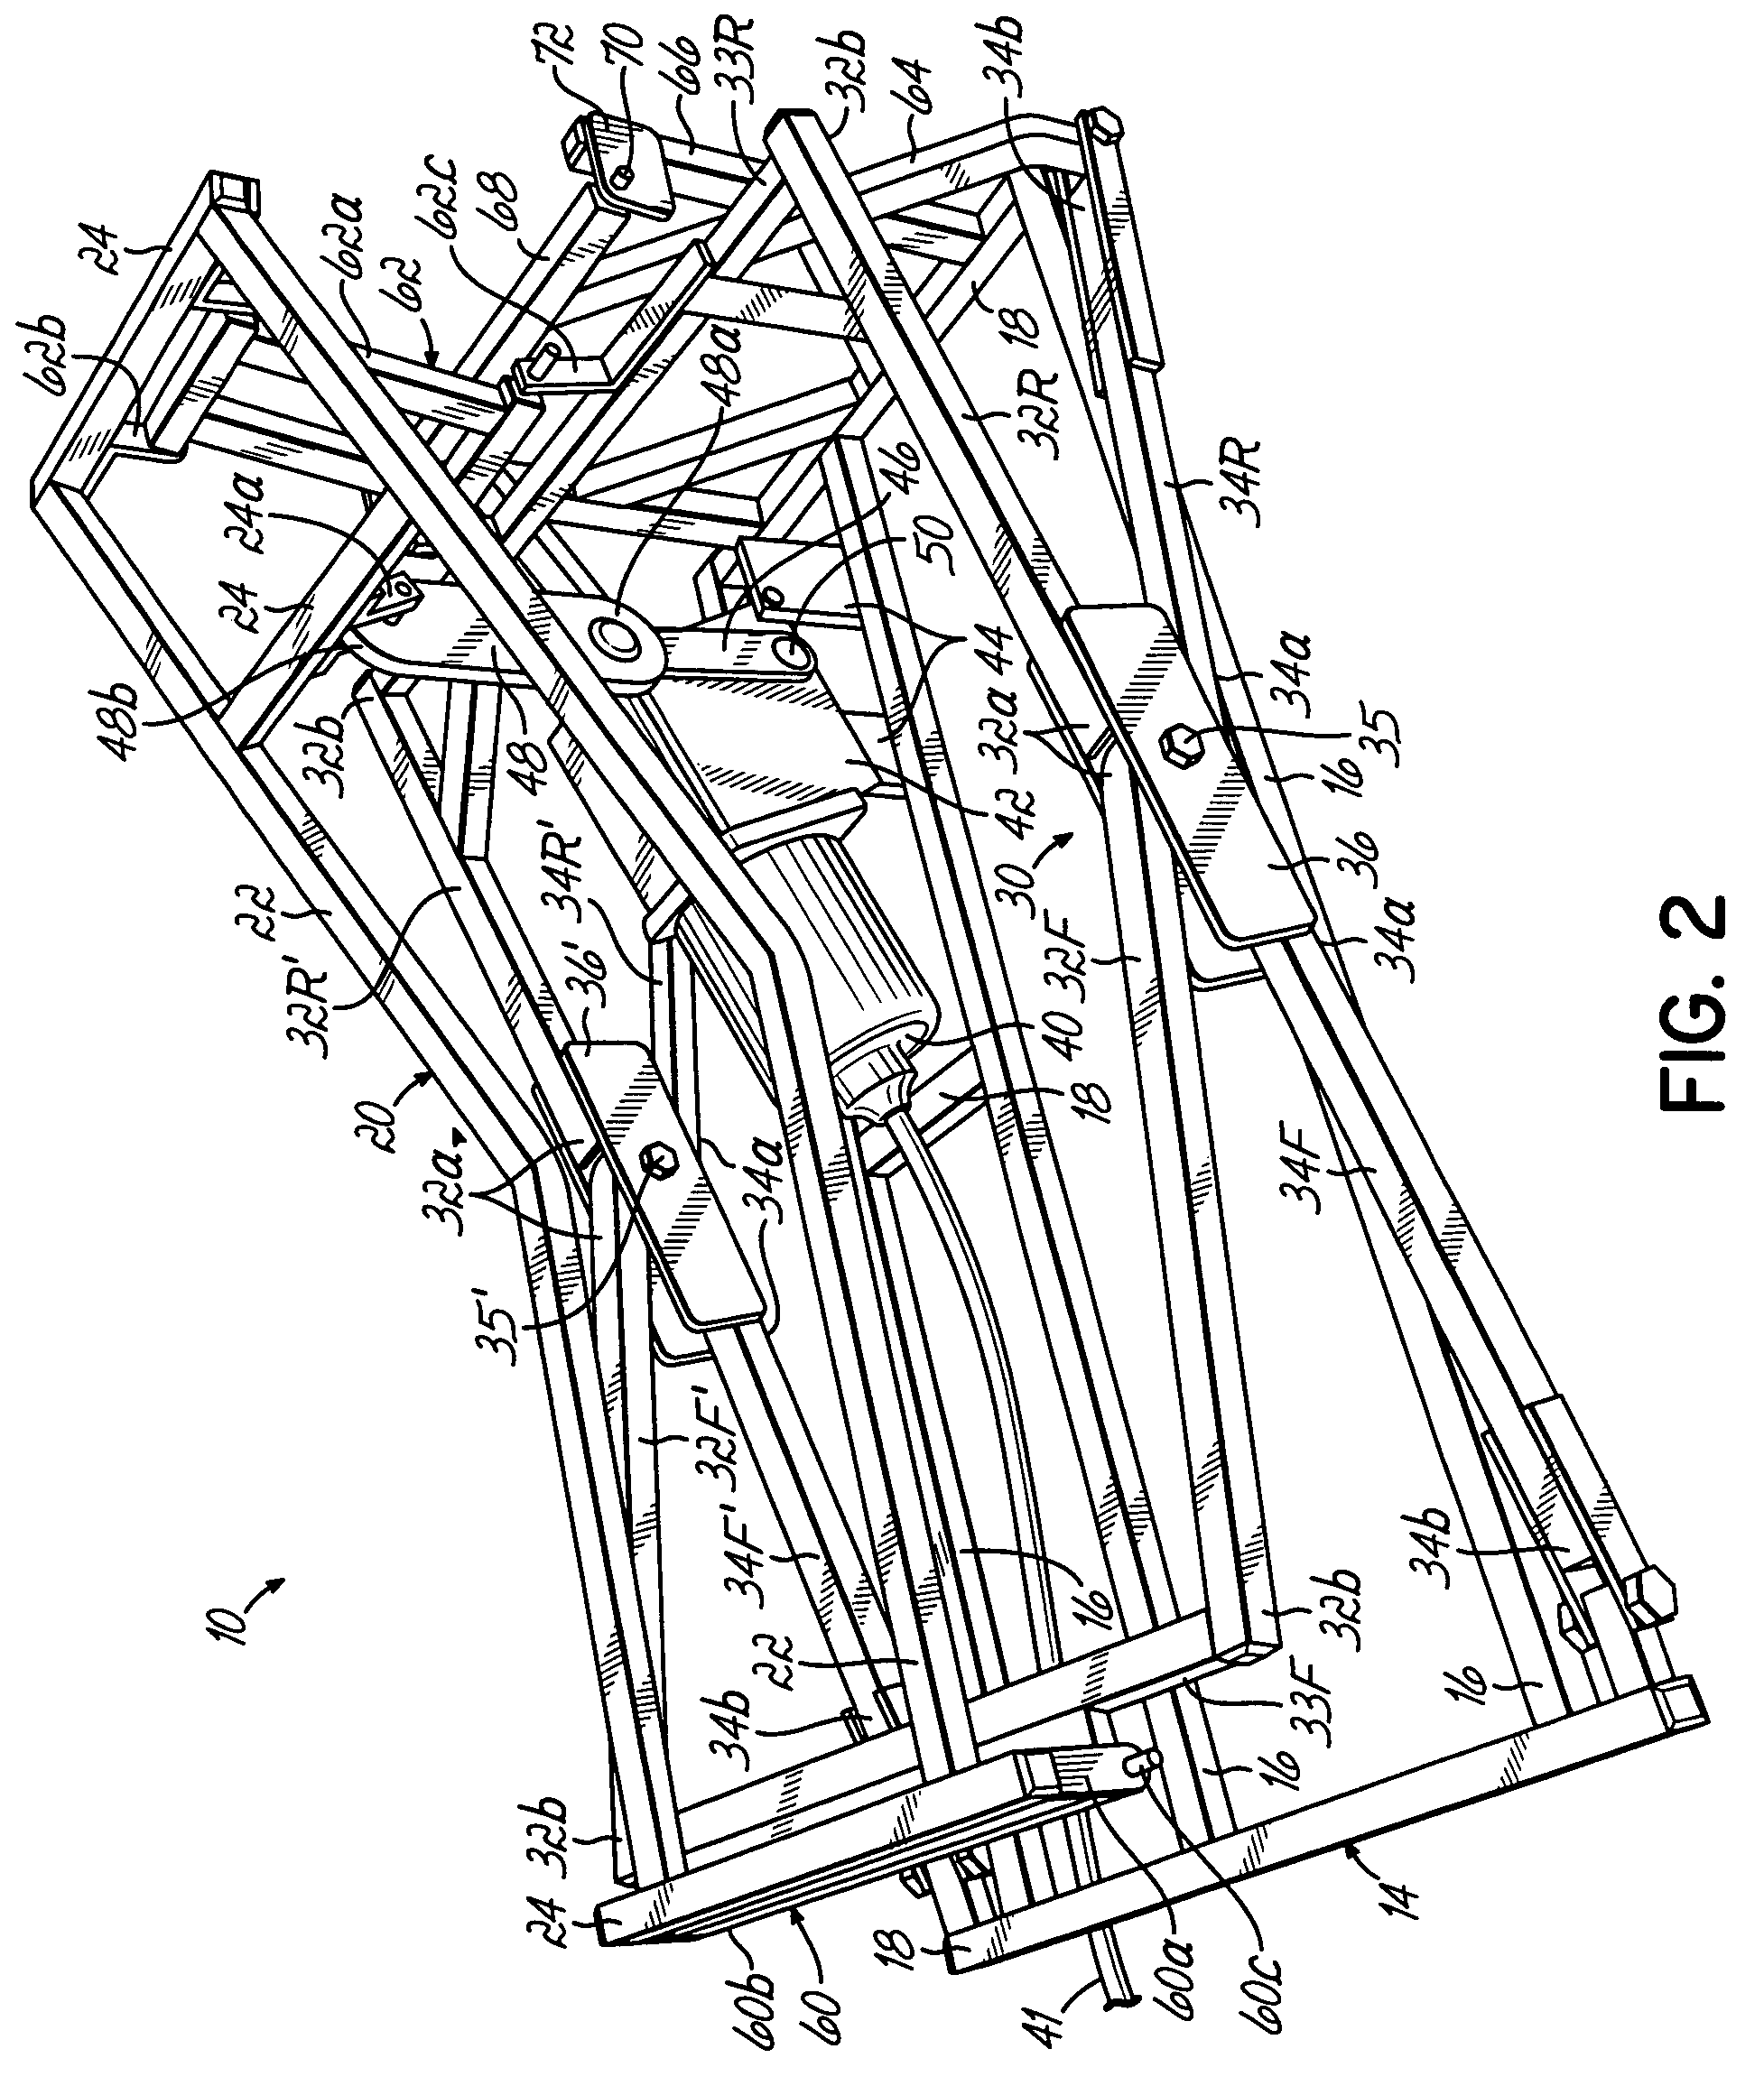 Apparatus and method for reciprocating an infant support